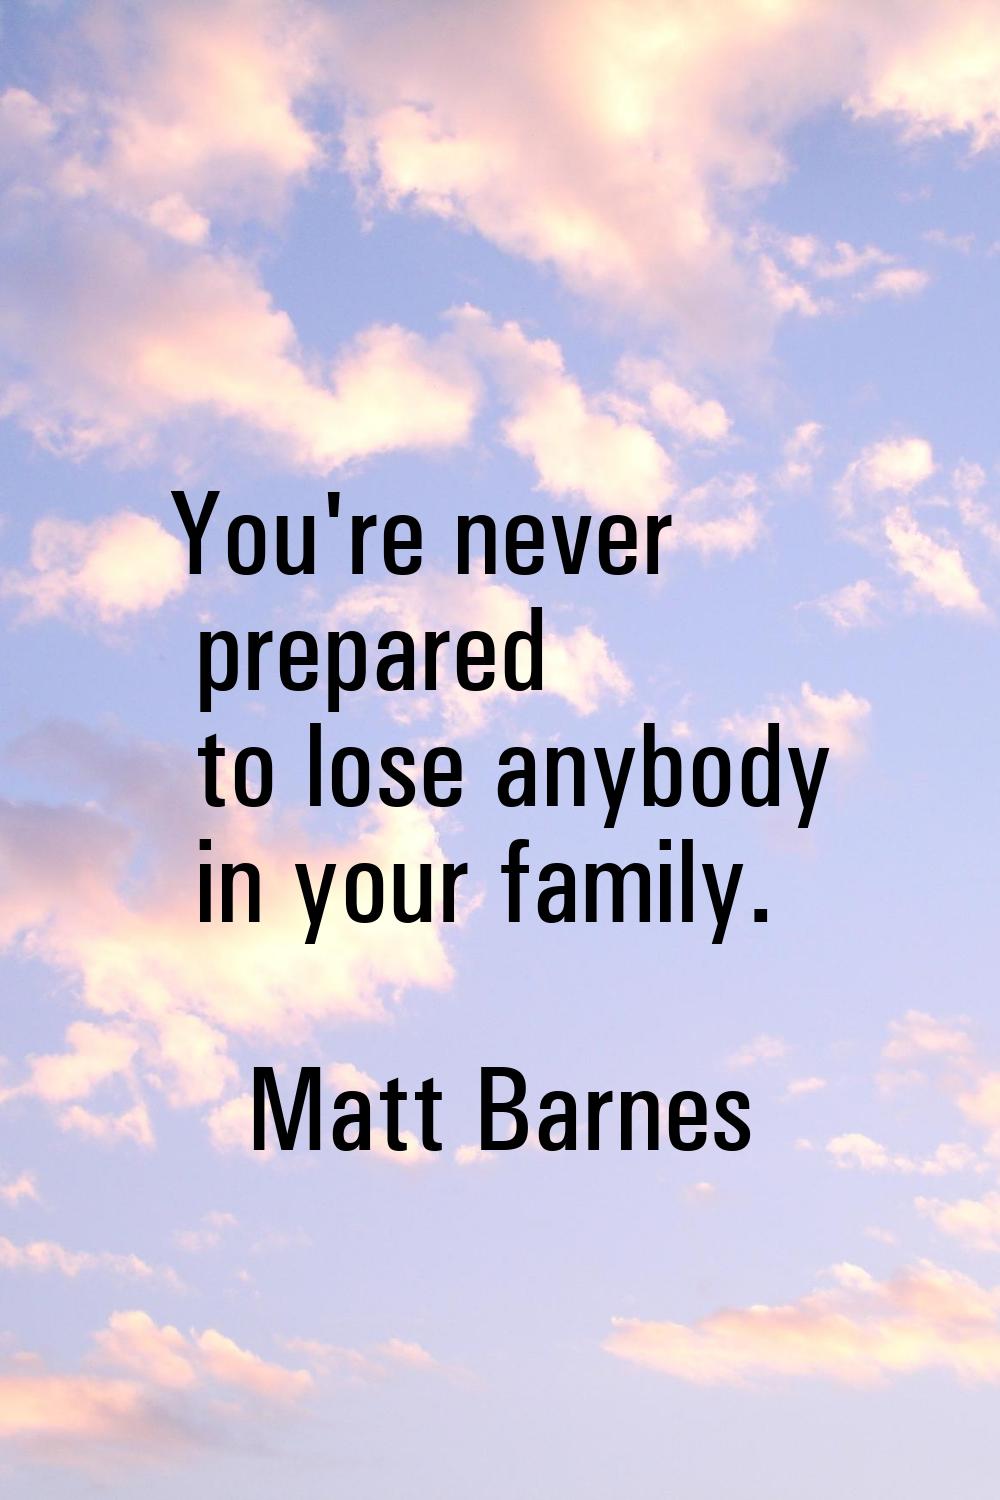 You're never prepared to lose anybody in your family.